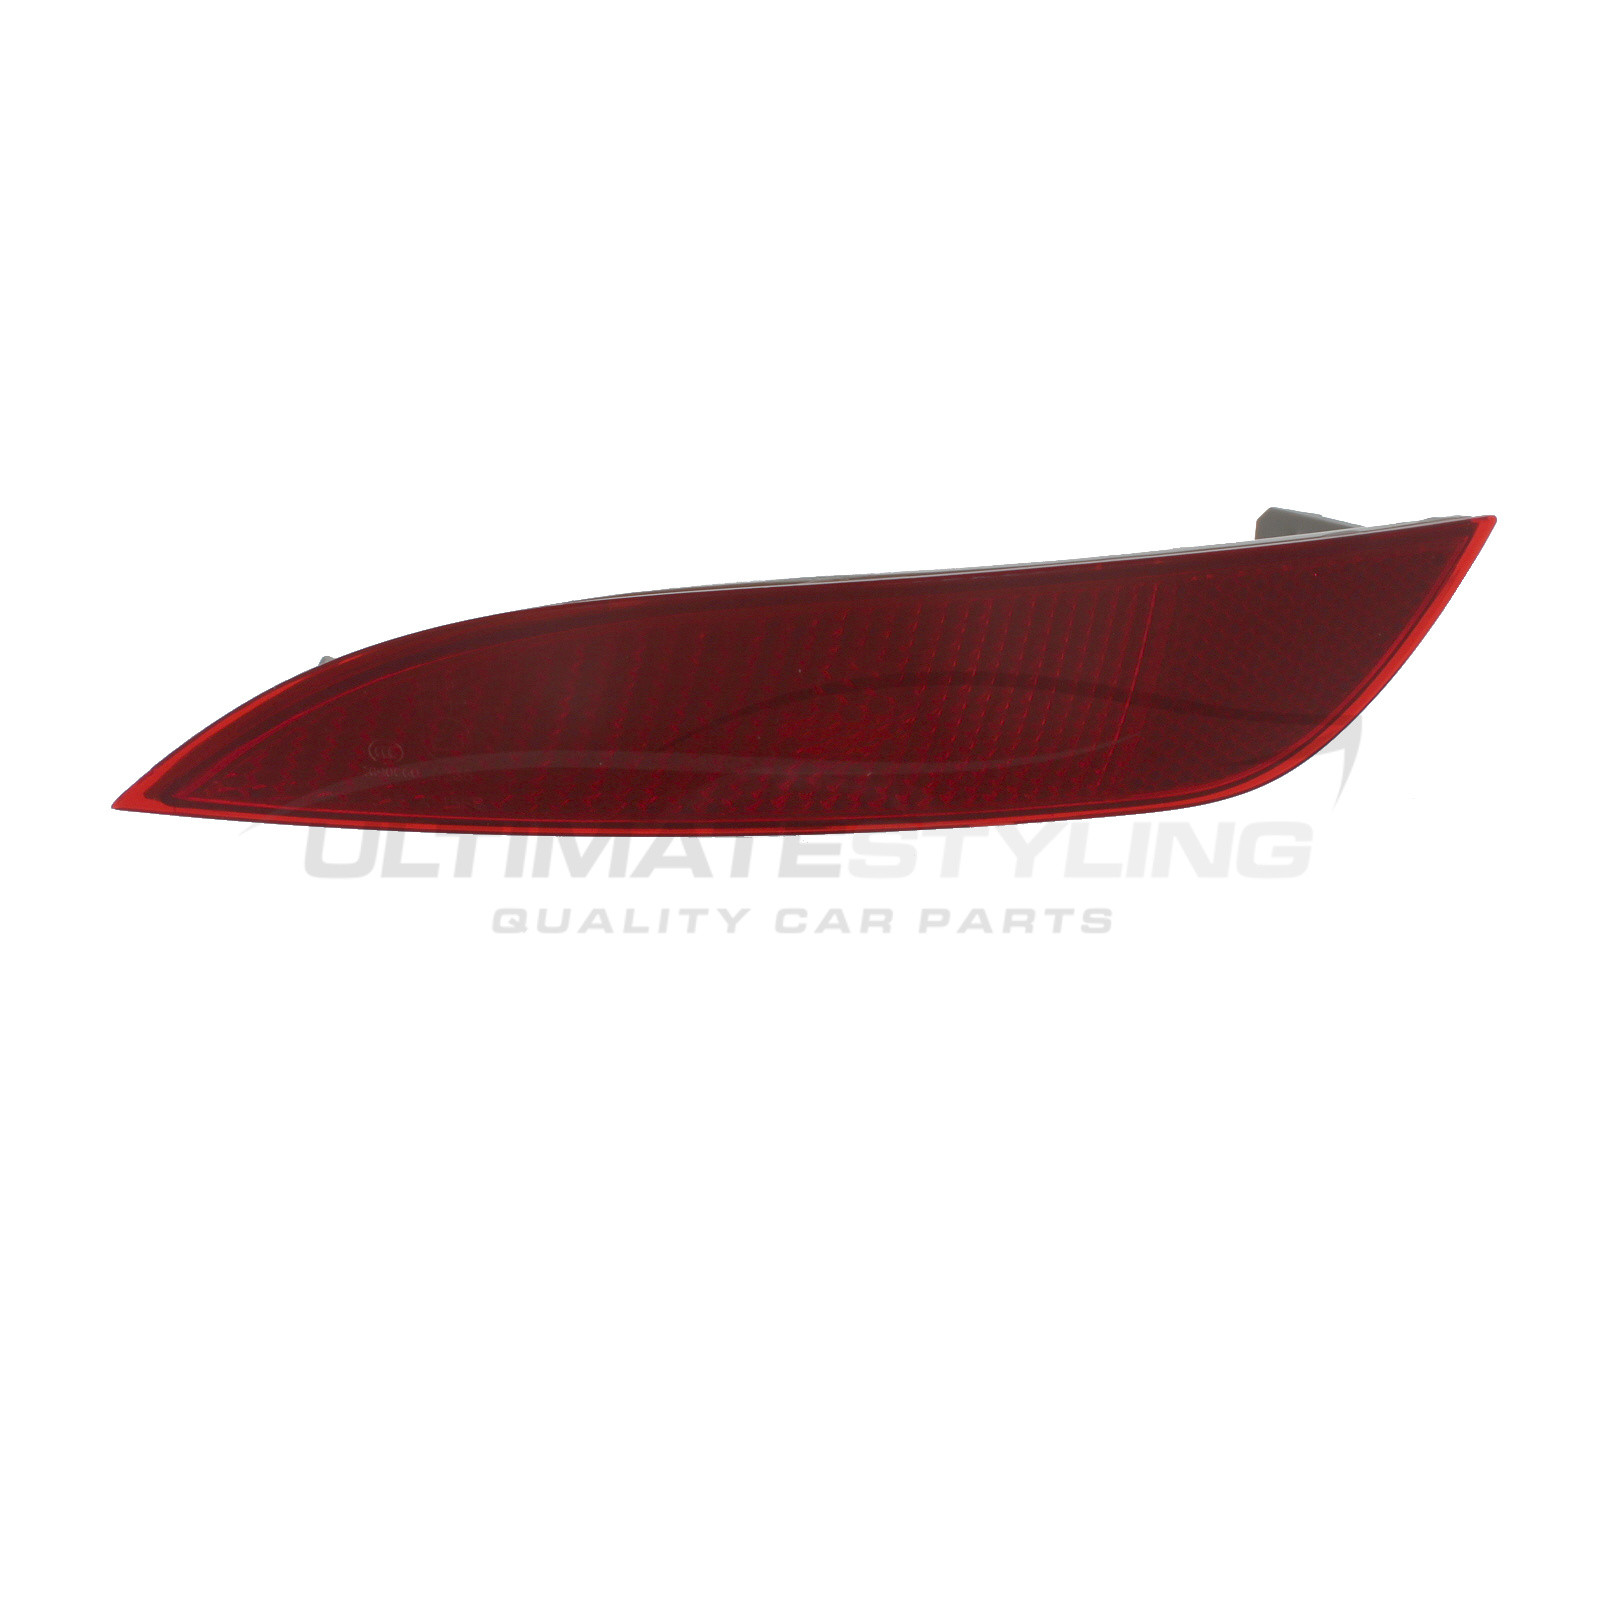 Rear Reflector for Ford Focus